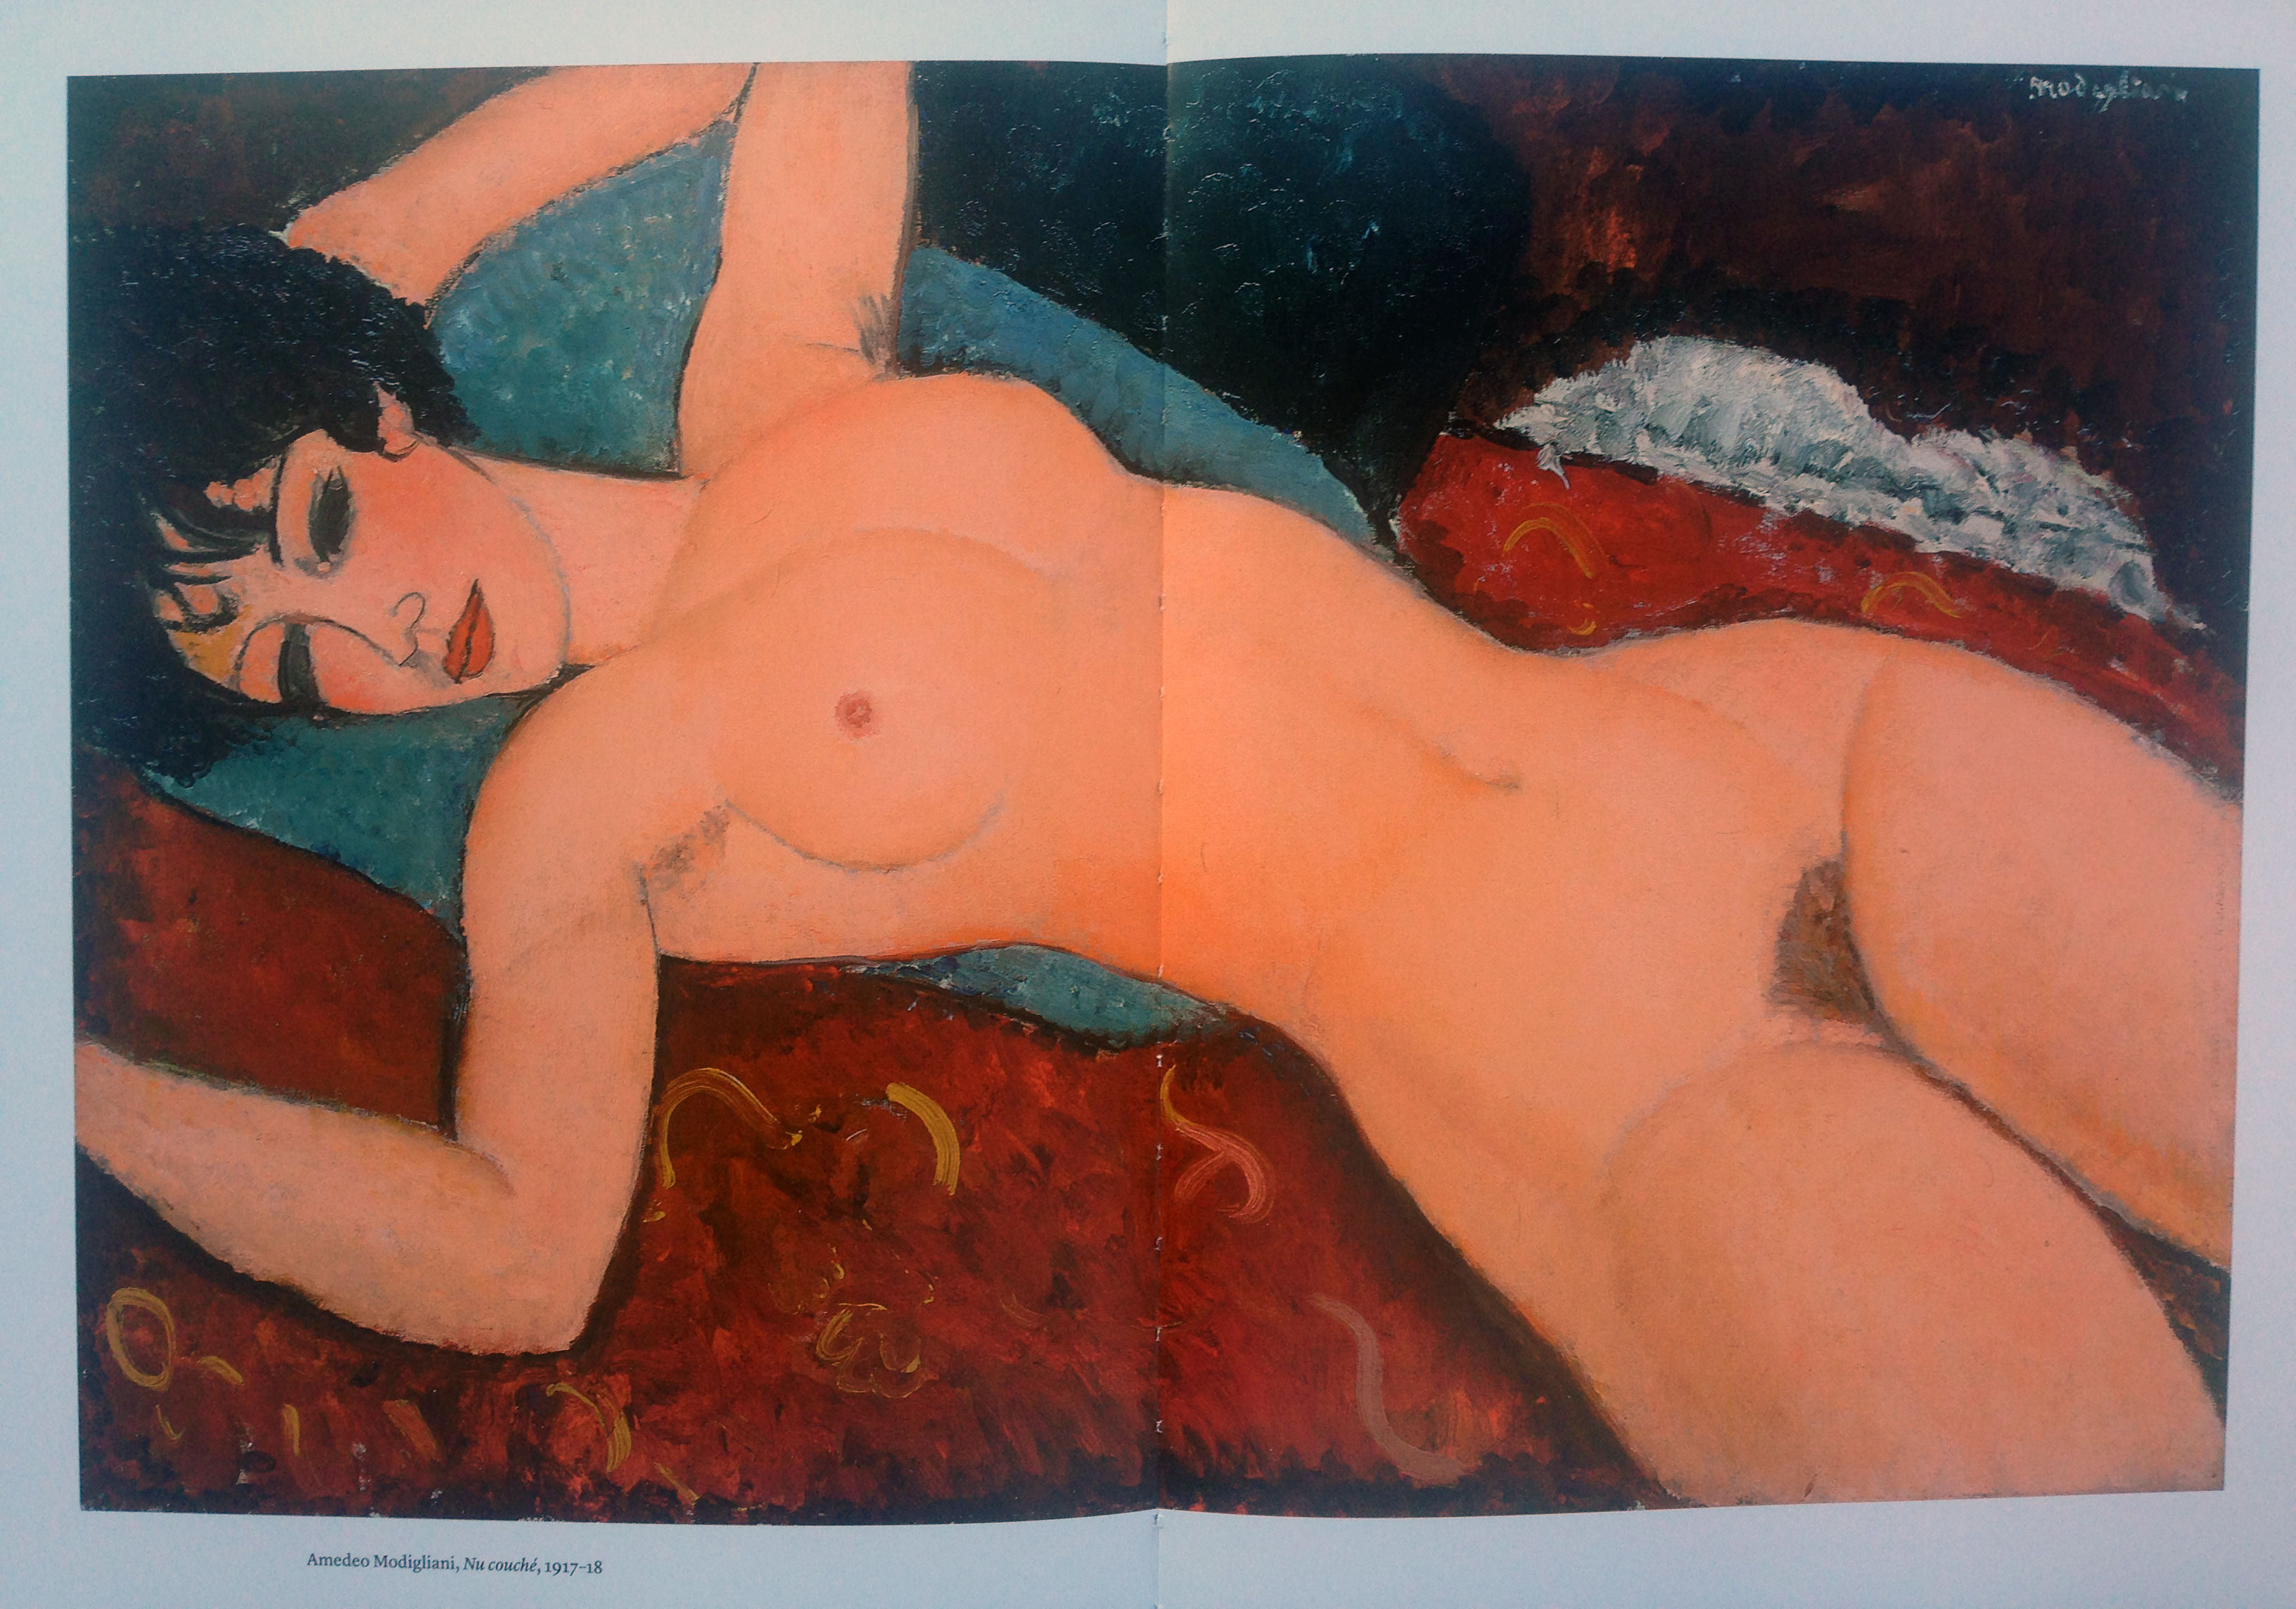 Nu couché (1917–18) by Amedeo Modigliani, as reproduced in The Art of the Erotic